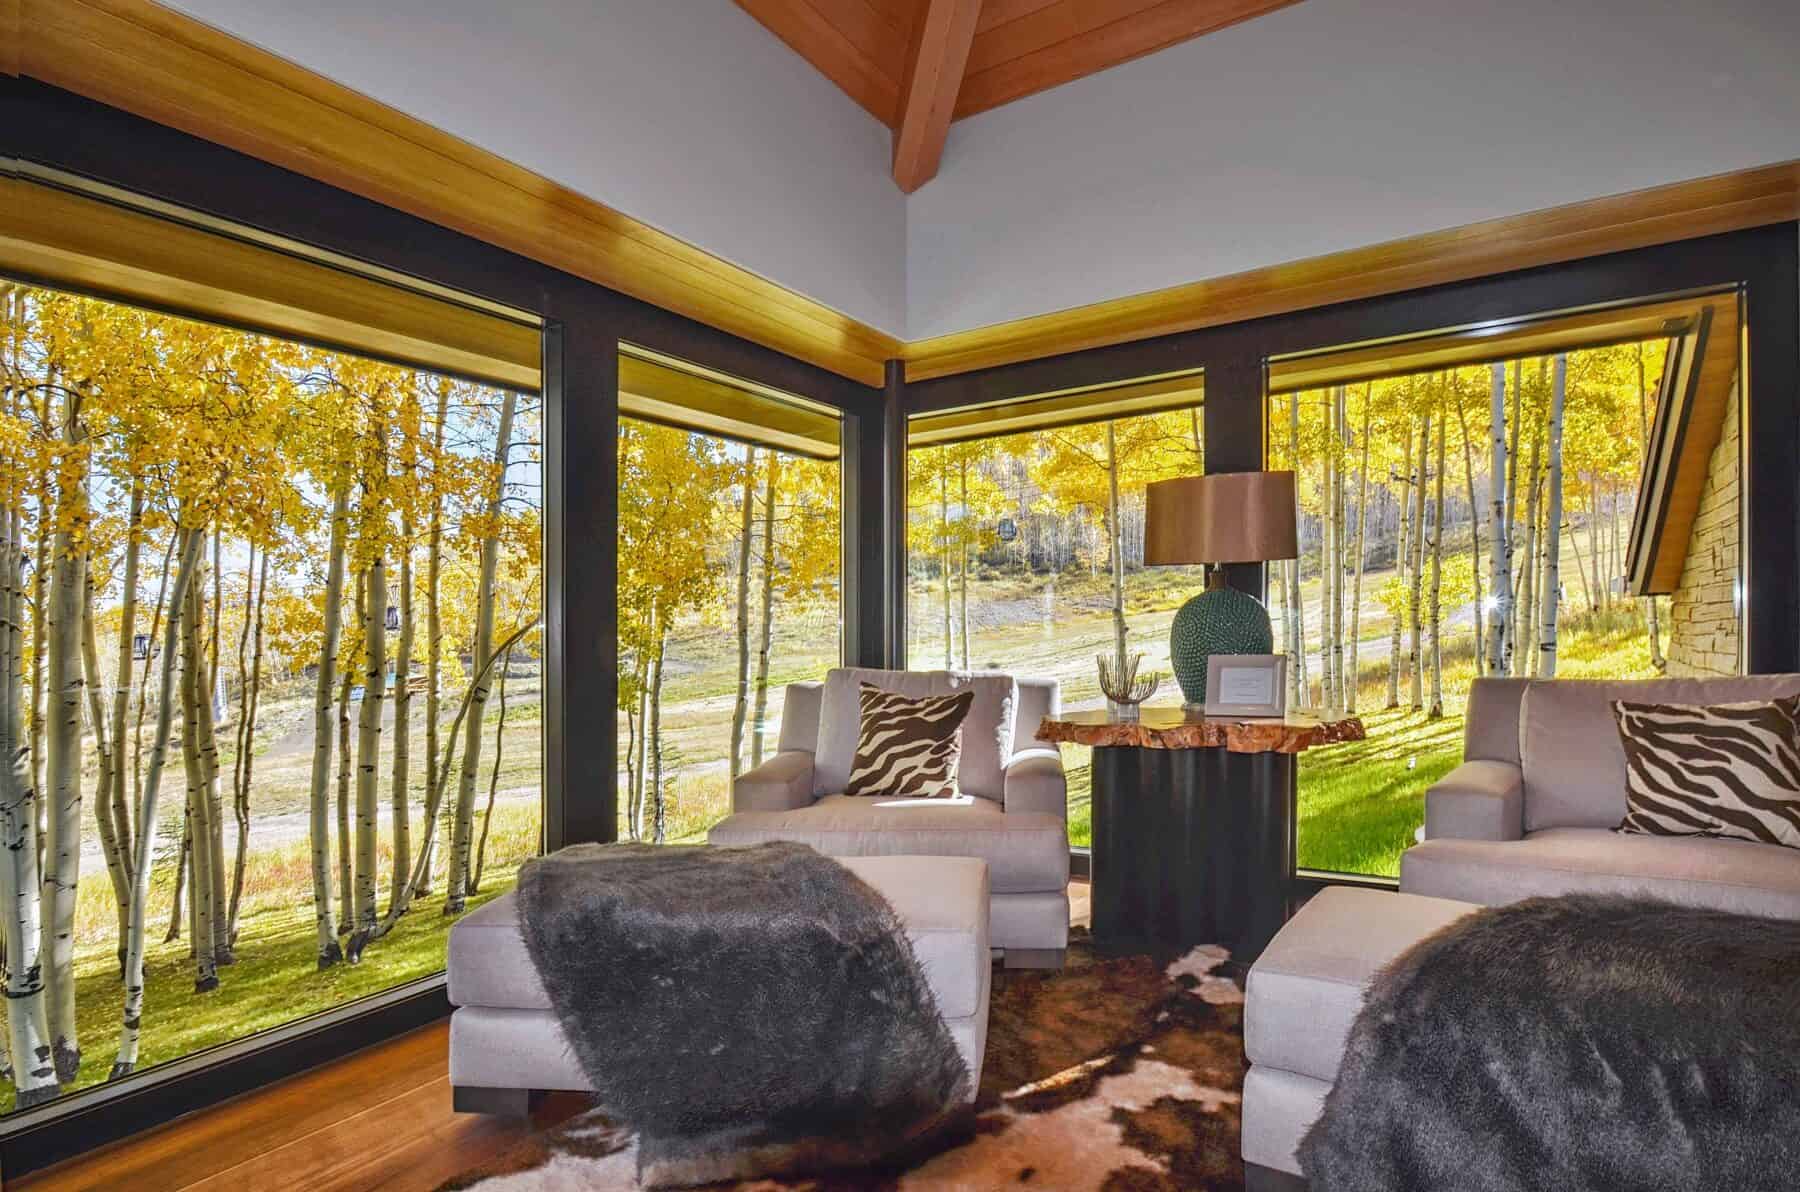 A Sitting Room with Nature View in Aspen, Colorado CusSitting Room Surrounded by Nature View in Aspen, Colorado Custom Home. Luxury Home Building Interiors